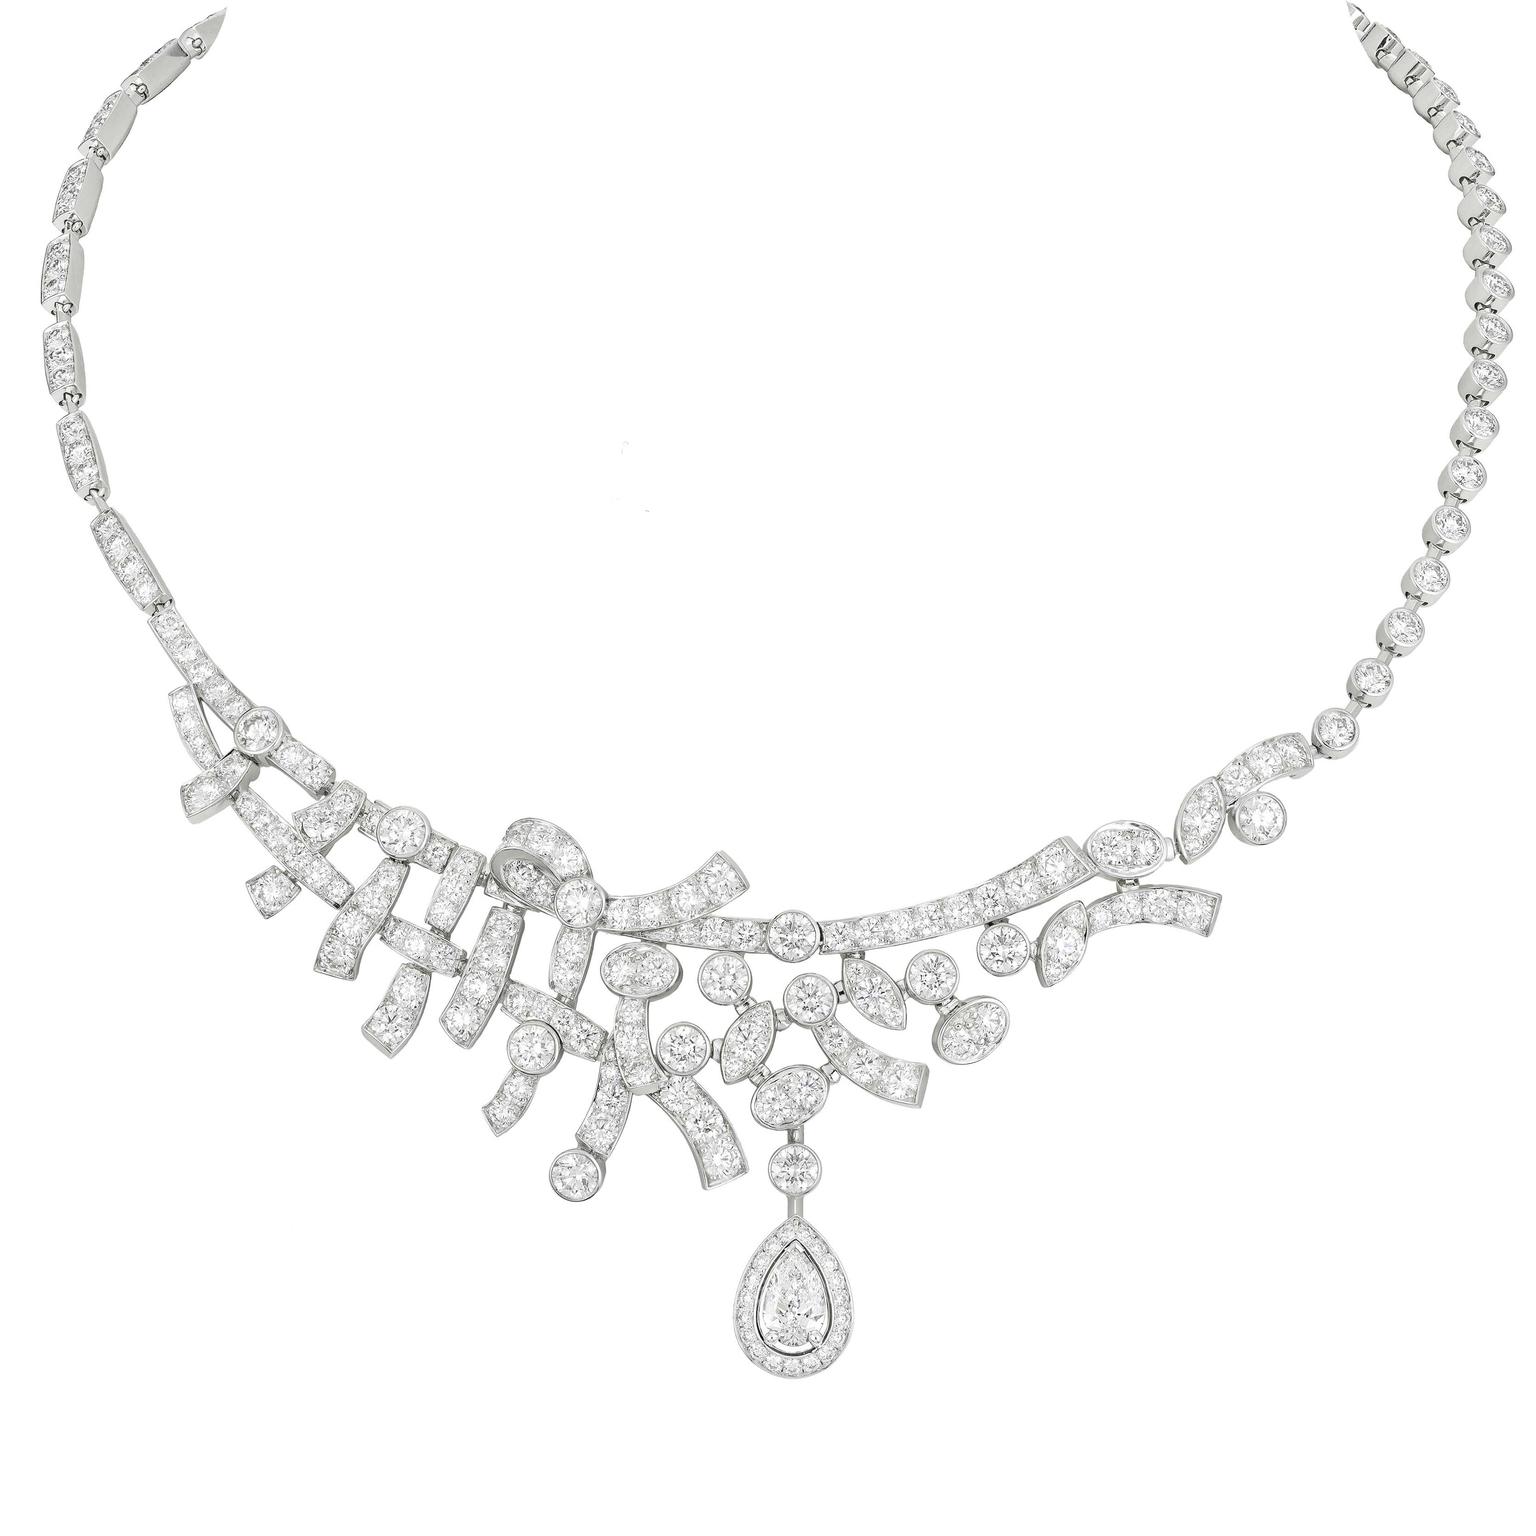 Tweed Ruban necklace by Chanel, High Jewellery collection 2023